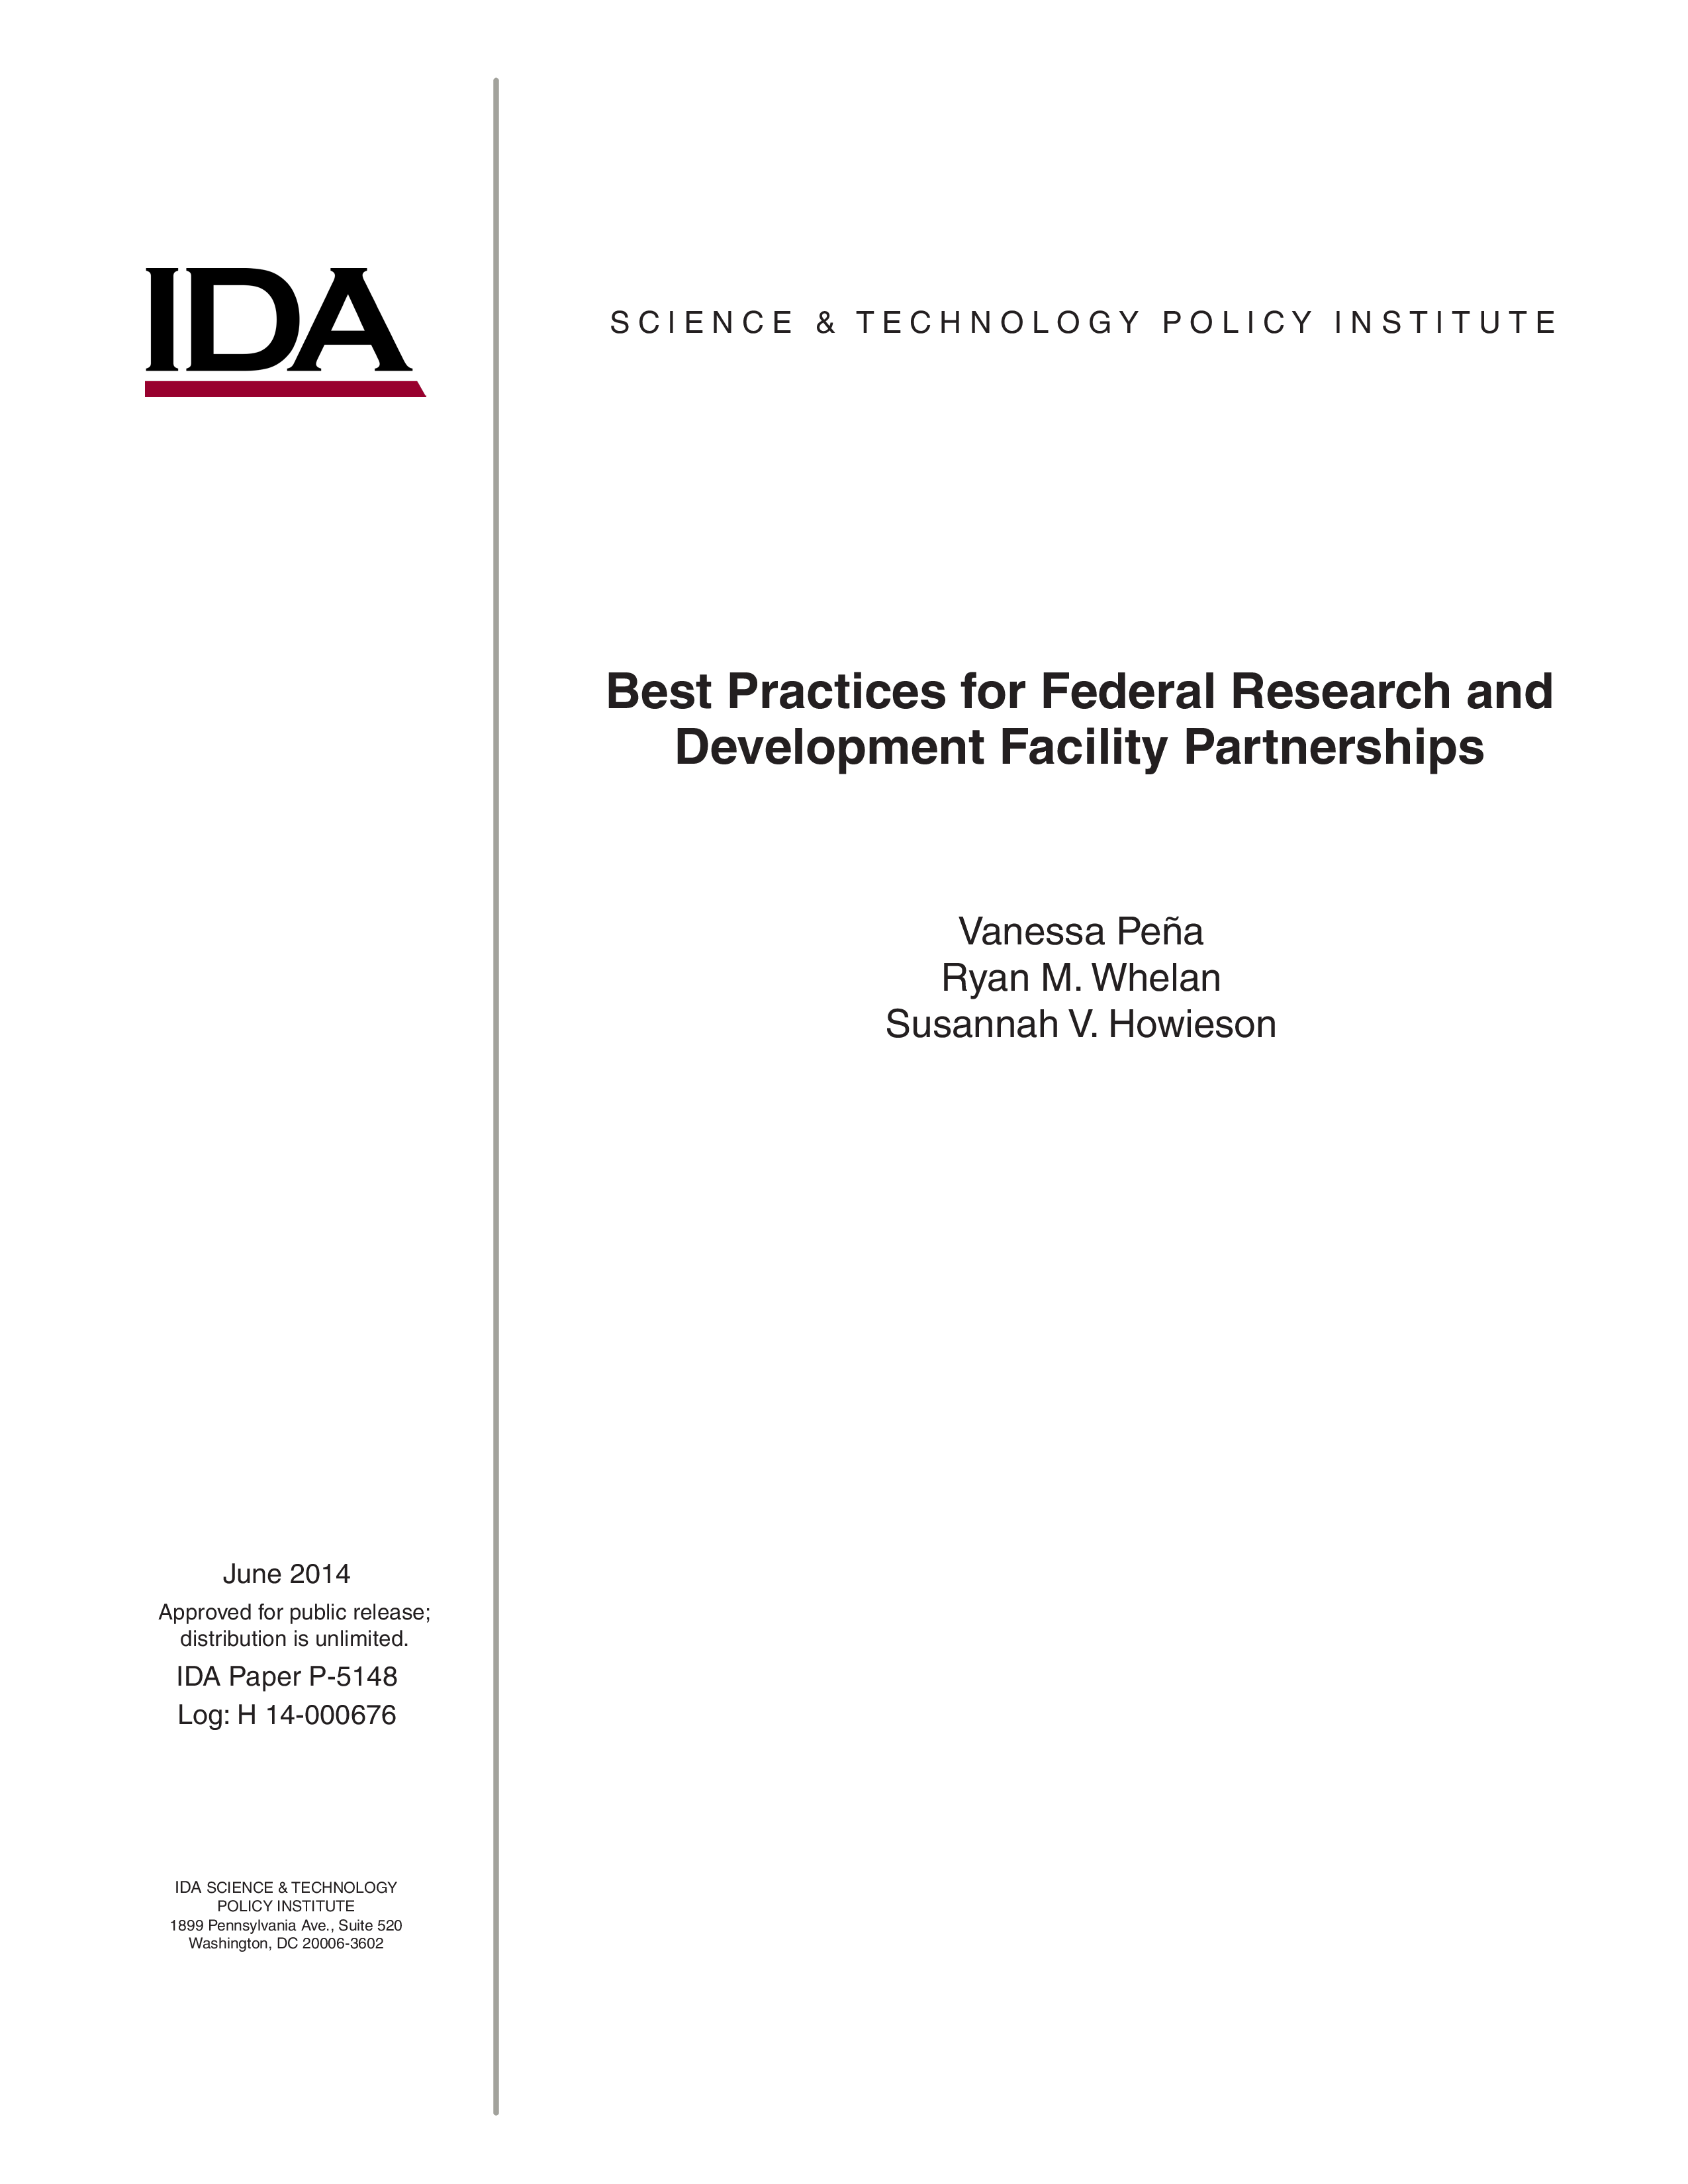 Best Practices for Federal Research and Development Facility Partnerships